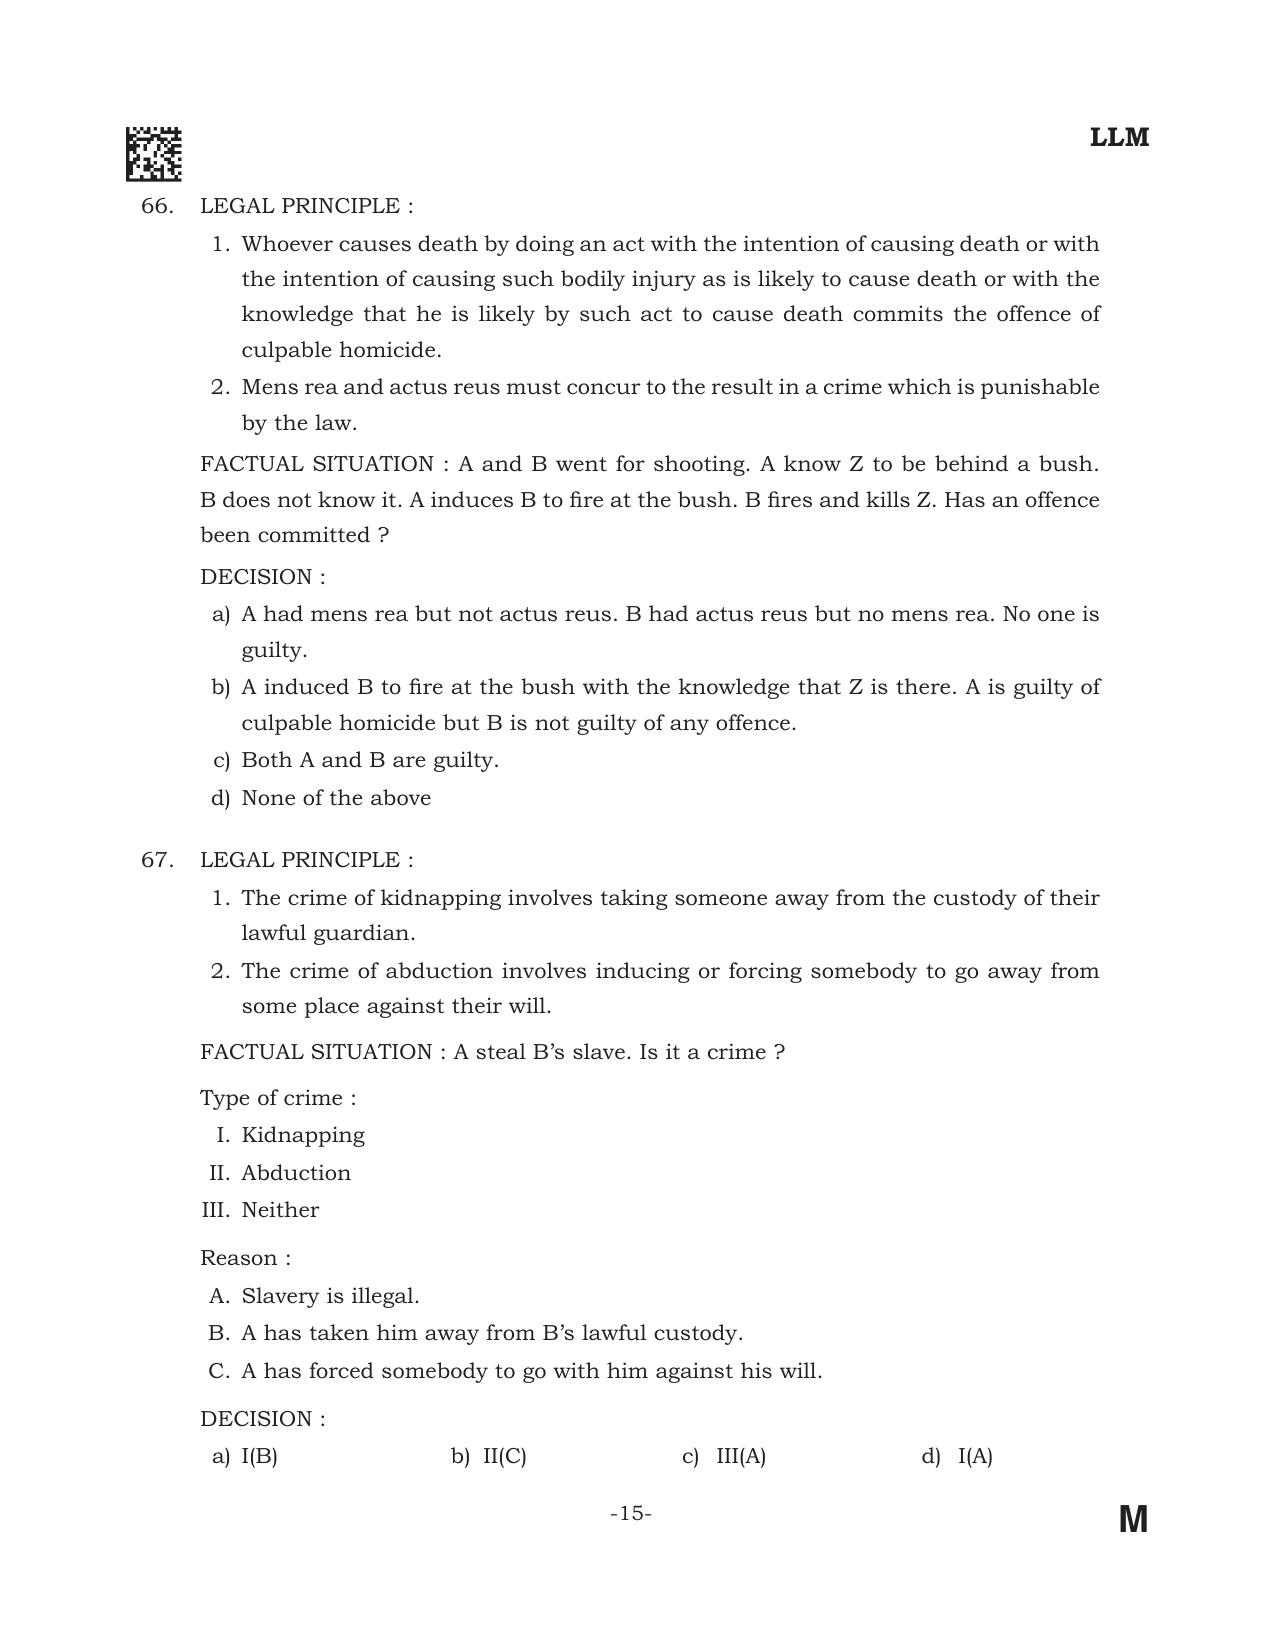 AILET 2022 Question Paper for LL.M - Page 15